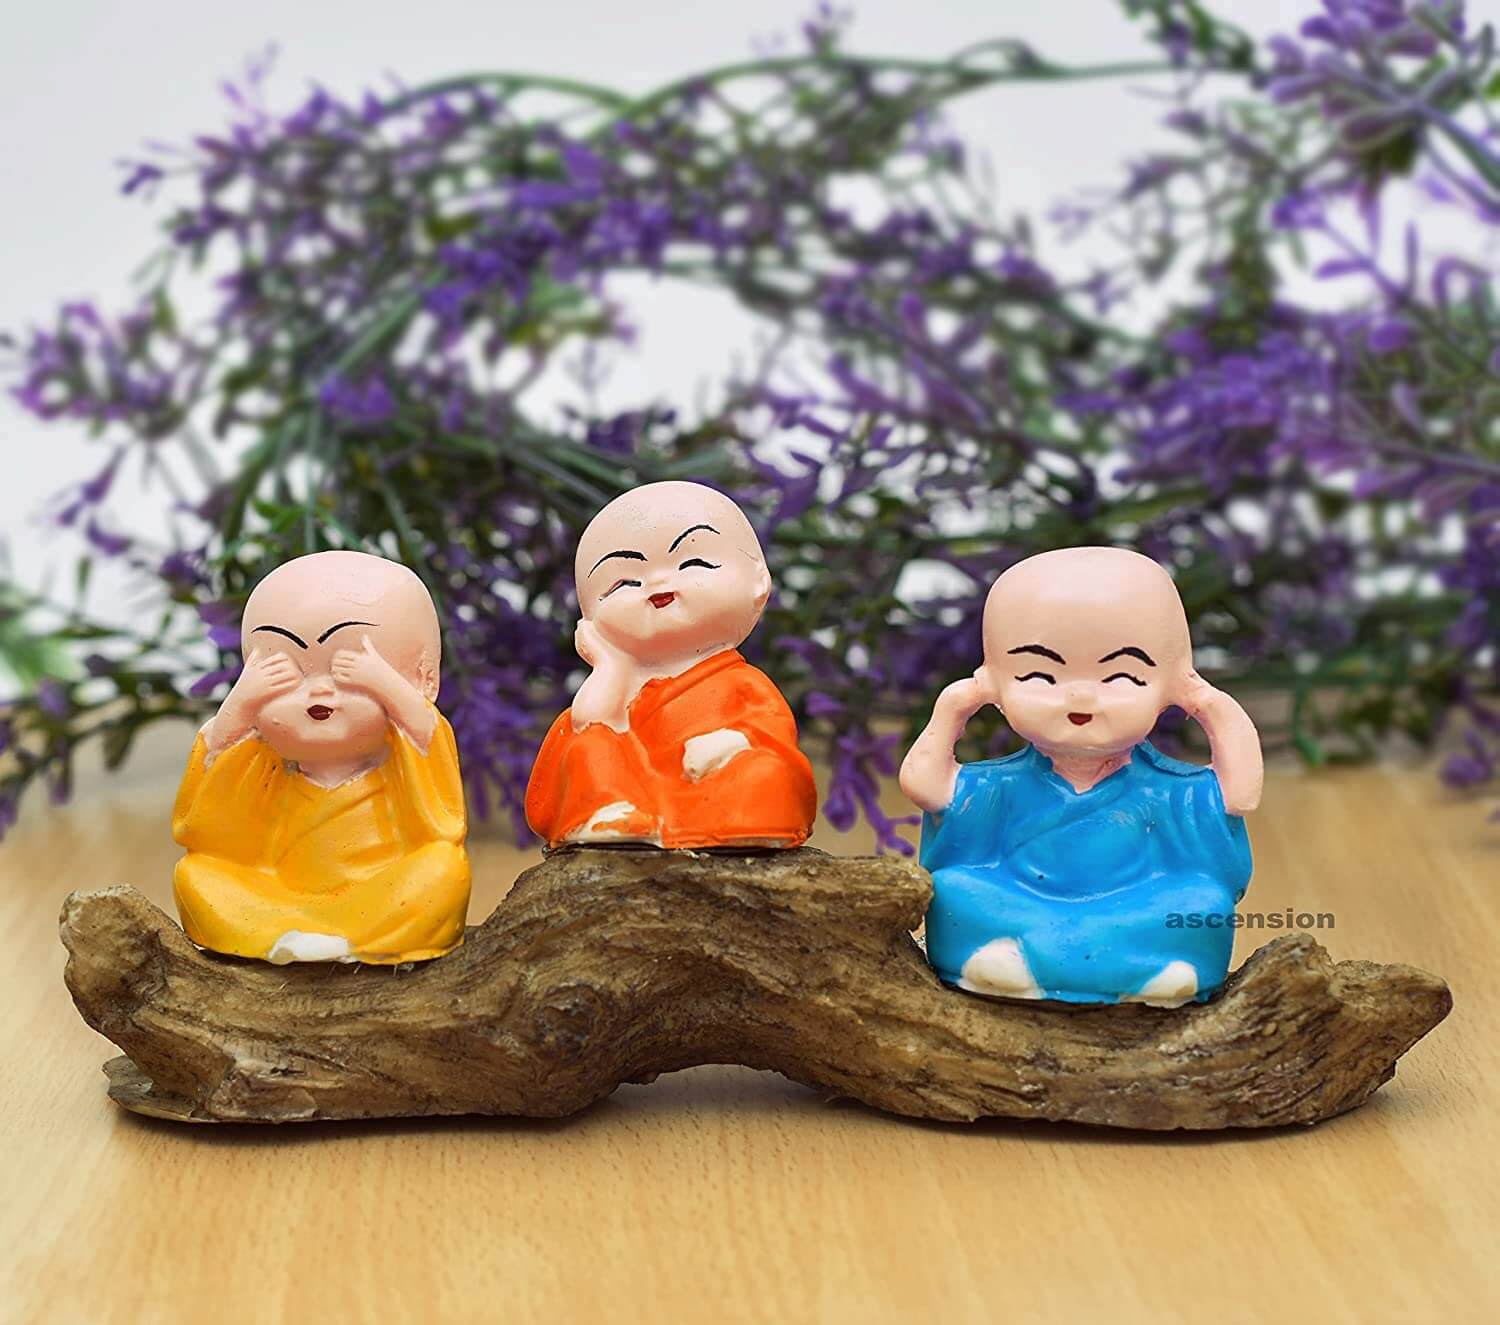 monk toys for home decor monk toys for kids monk toys for car decor monk toys premium quality buddha monks set 4 buddha monk statue polyresin statues